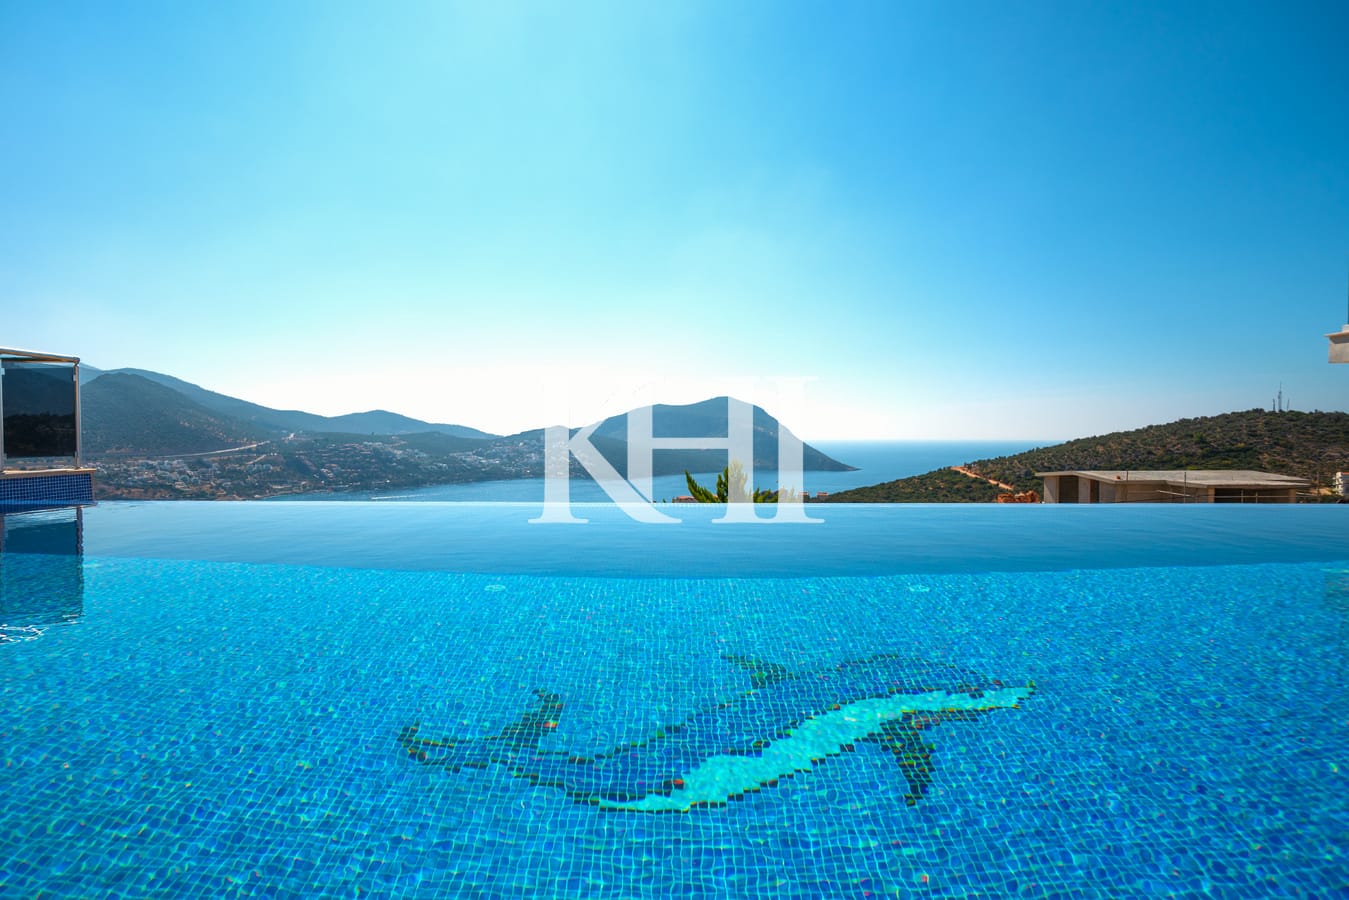 Detached Villa For Sale With Panoramic Kalkan View Slide Image 22